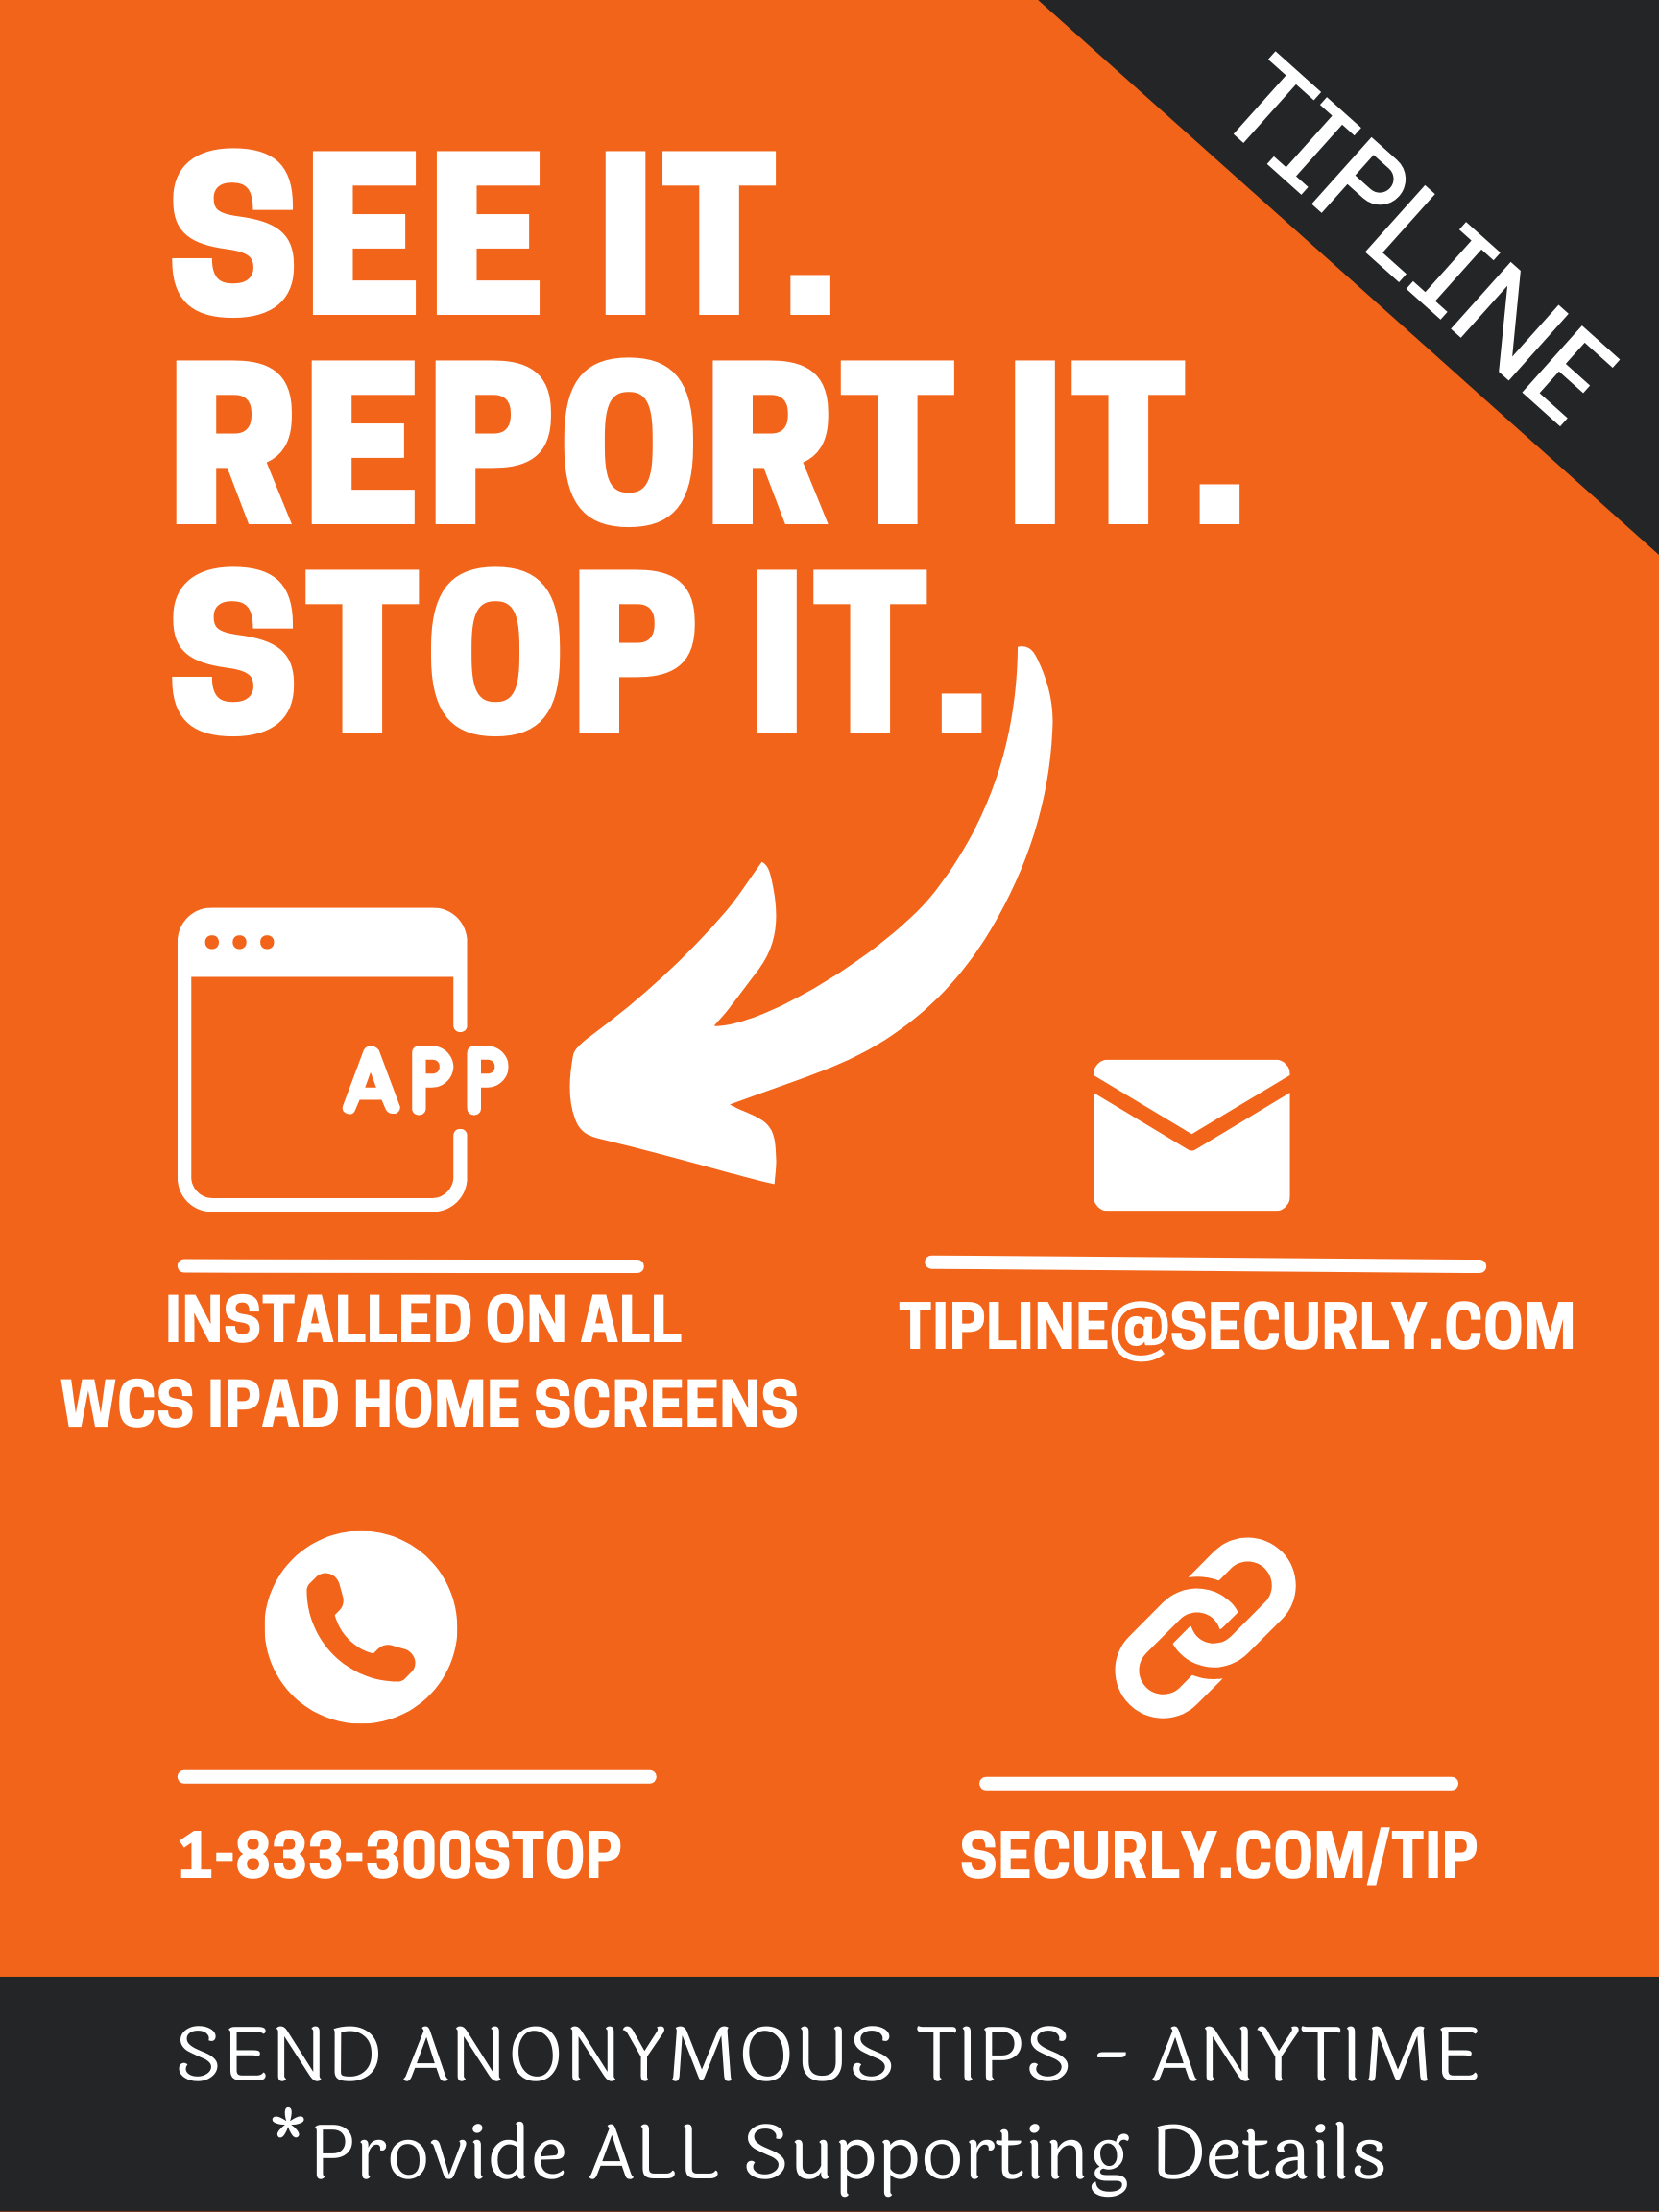 TIPLINE: See it. Report it. Stop it. App installed on all wcs ipad homescreens. Tipline@securly.com. 1-833-300STOP Securly.com/tip. Send anonymous tips - anytime *Provide ALL supporting details. Orange, gray, and white color scheme.